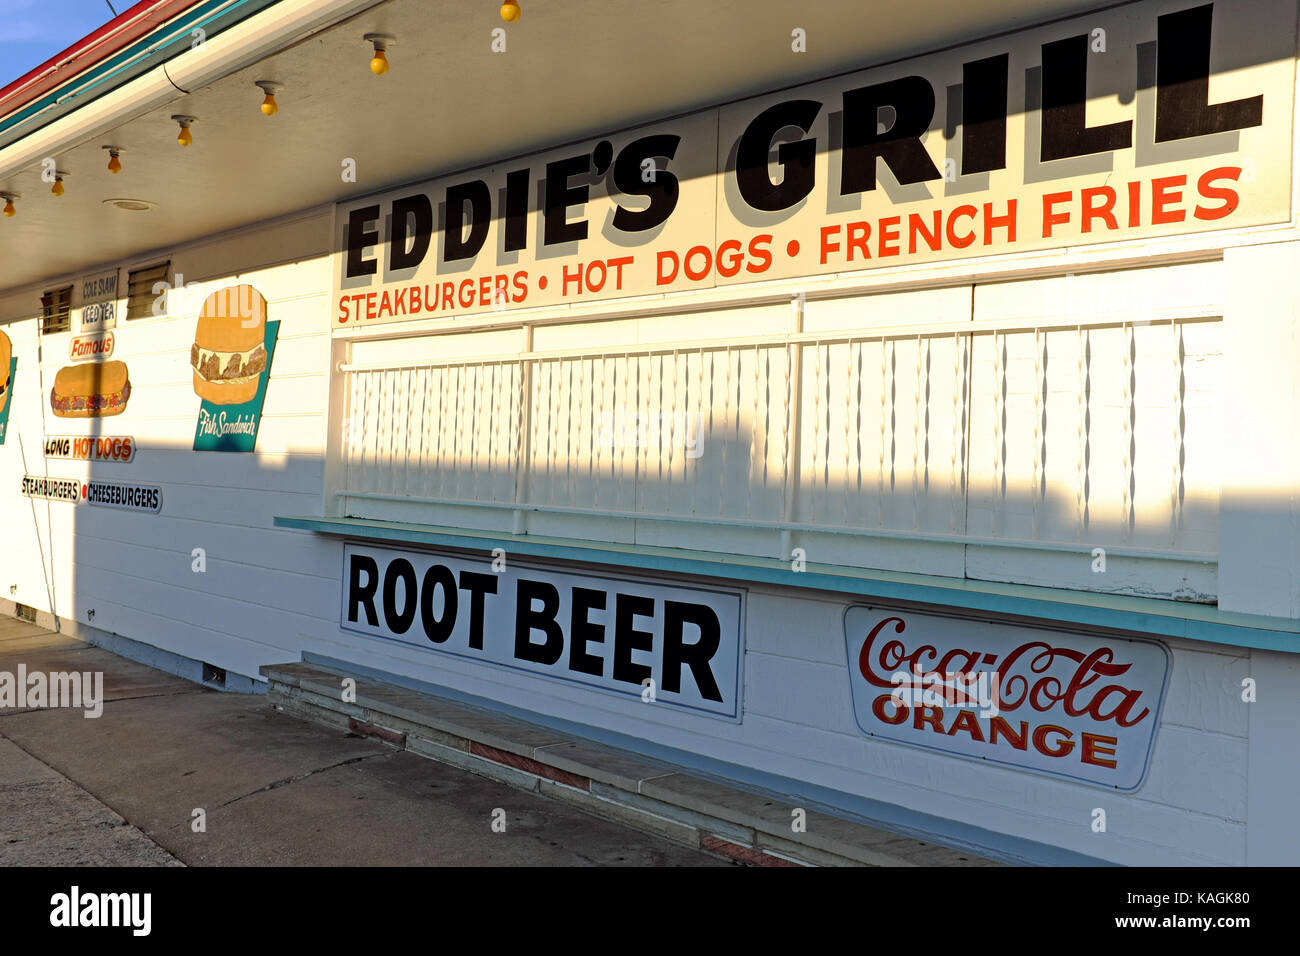 Eddie's Grill has been a fixture of the Geneva-on-the-Lake strip since 1950 attracting diners and summer visitors to Ohio's first summer resort town. Stock Photo